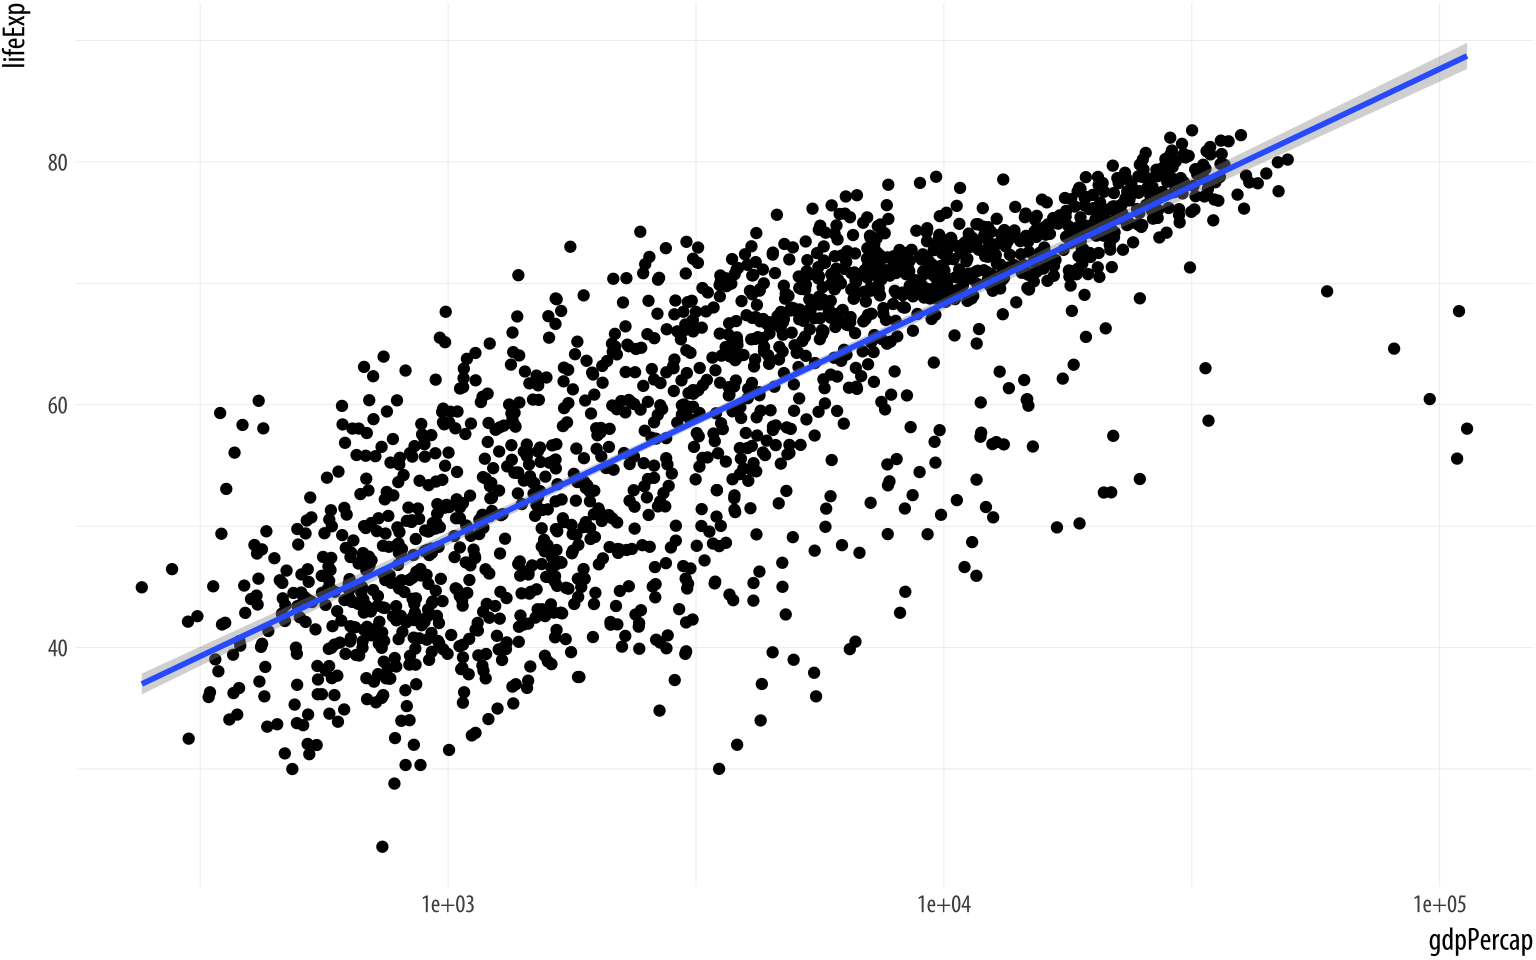 Life Expectancy vs GDP scatterplot, with a GAM smoother and a log scale on the x-axis.